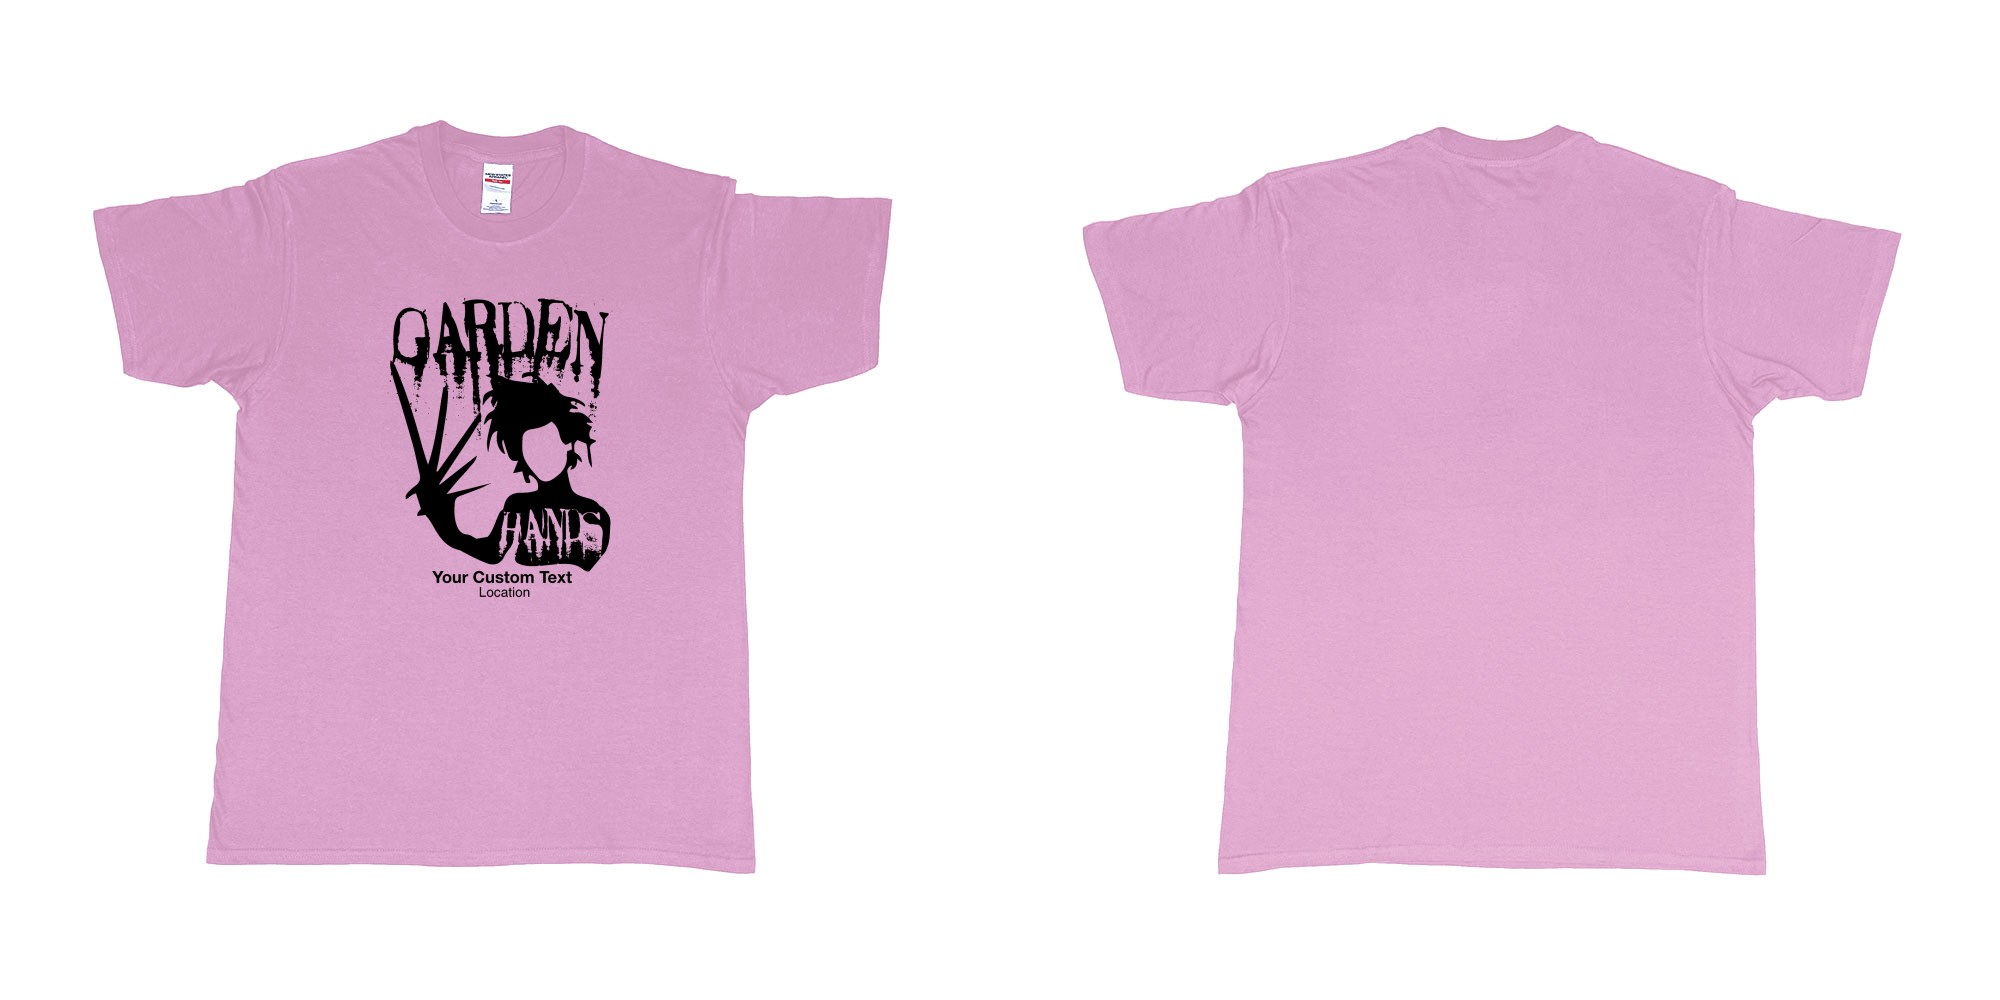 Custom tshirt design garden hands edward scissorhands custom design in fabric color light-pink choice your own text made in Bali by The Pirate Way